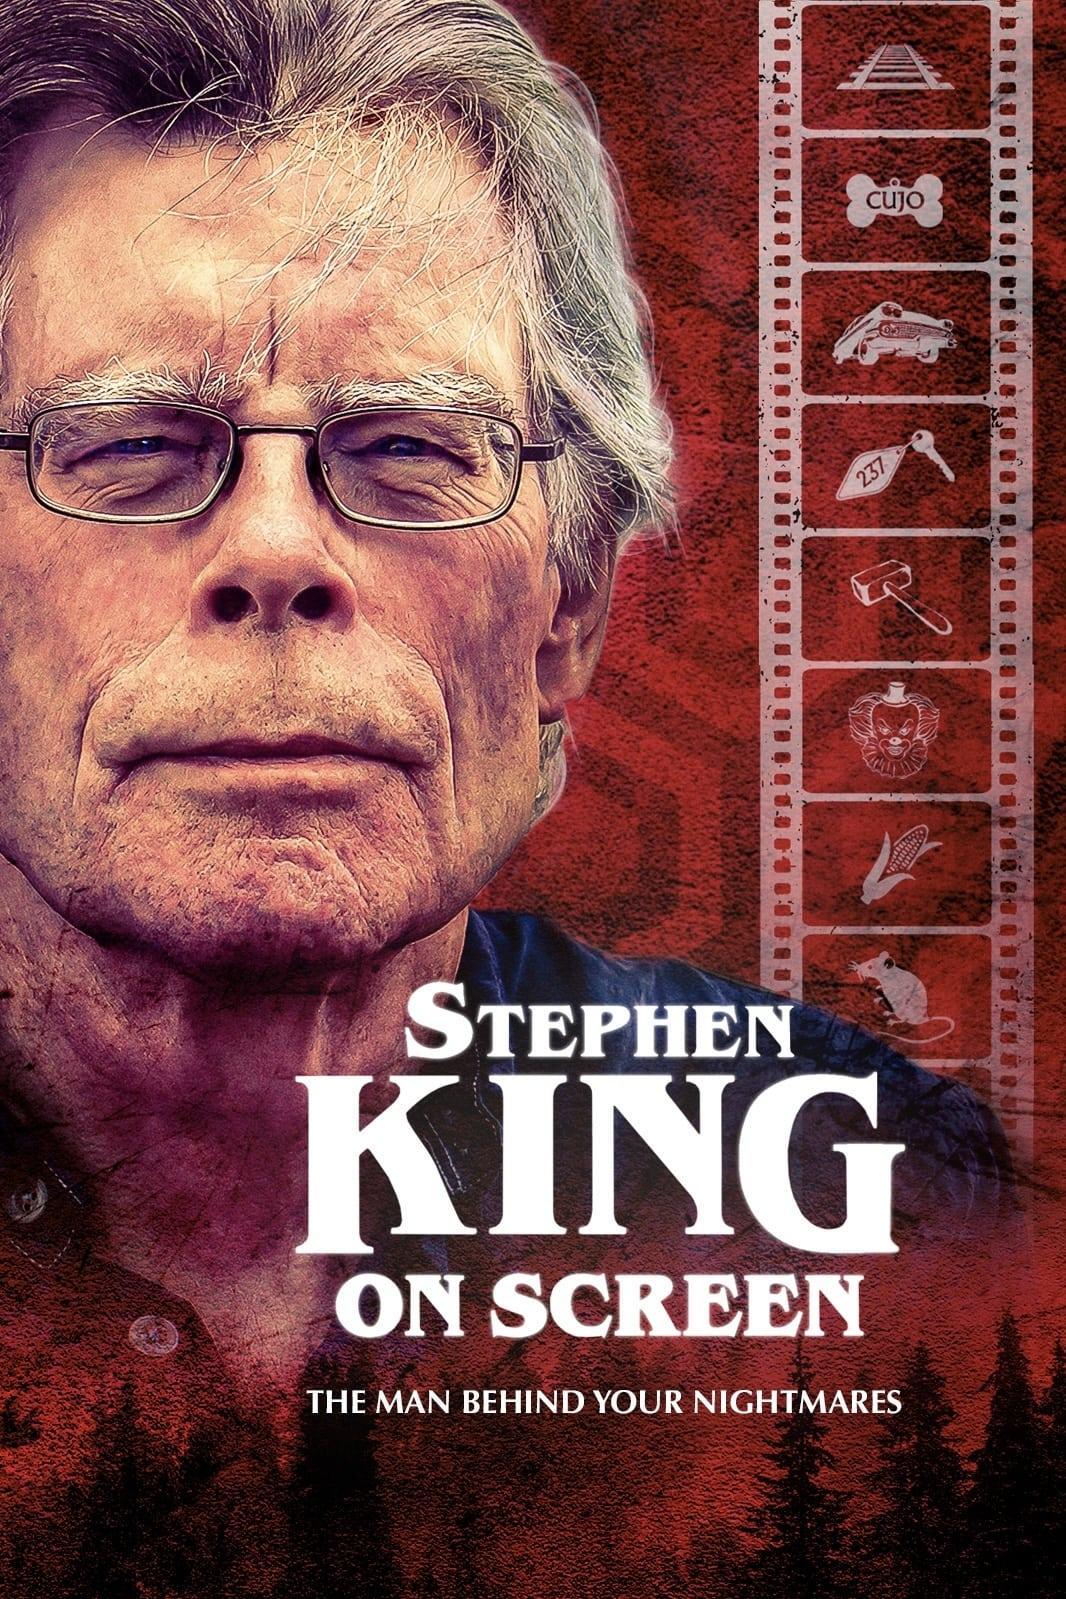 King on Screen poster